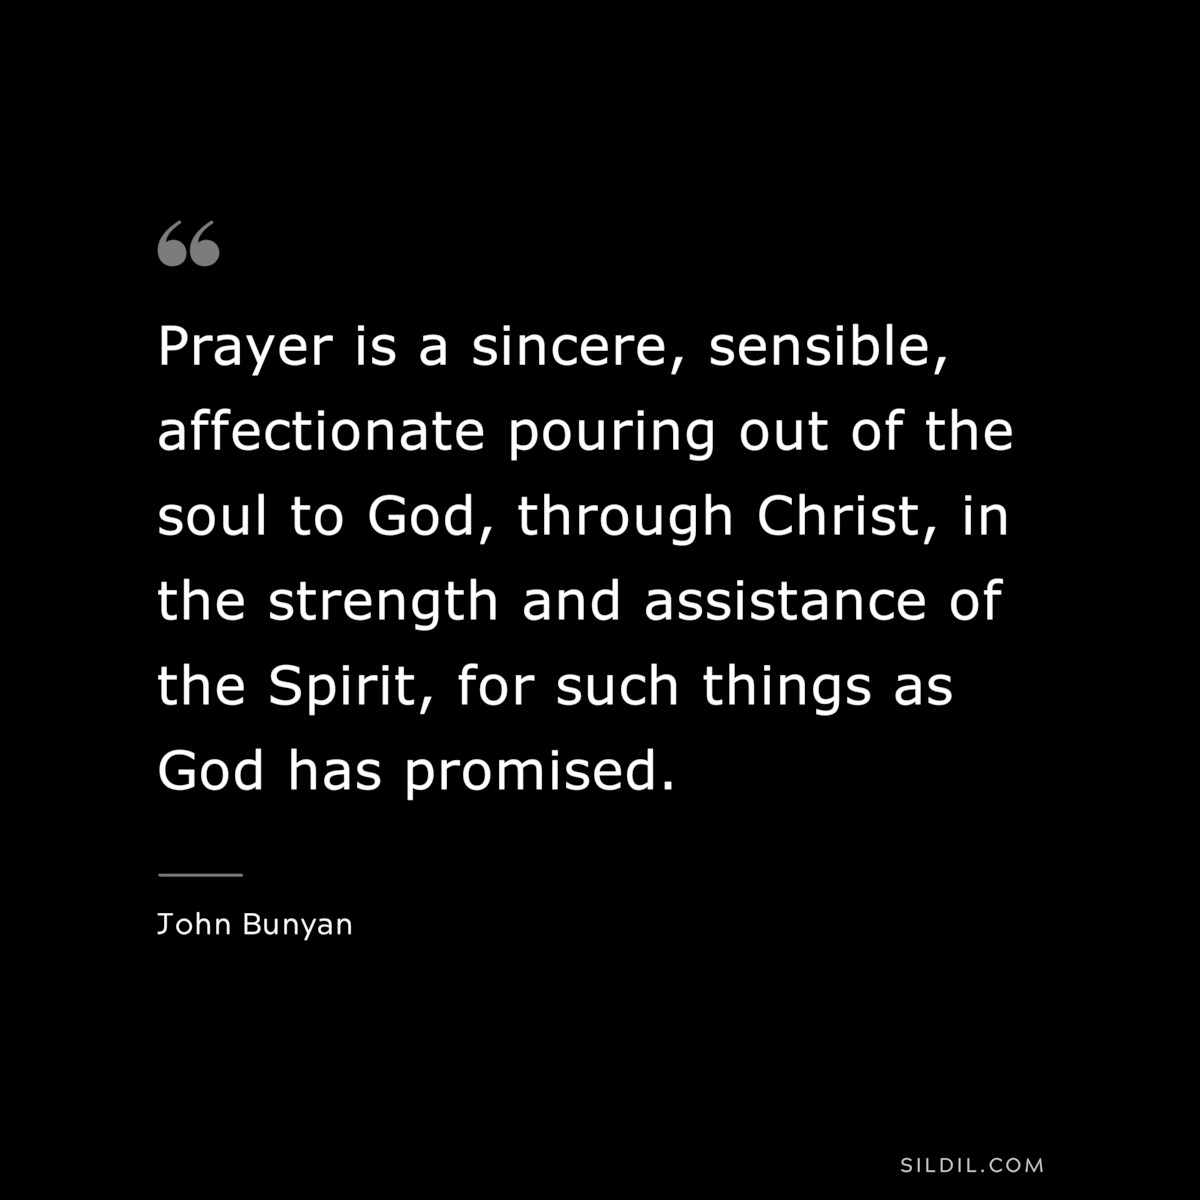 Prayer is a sincere, sensible, affectionate pouring out of the soul to God, through Christ, in the strength and assistance of the Spirit, for such things as God has promised. ― John Bunyan